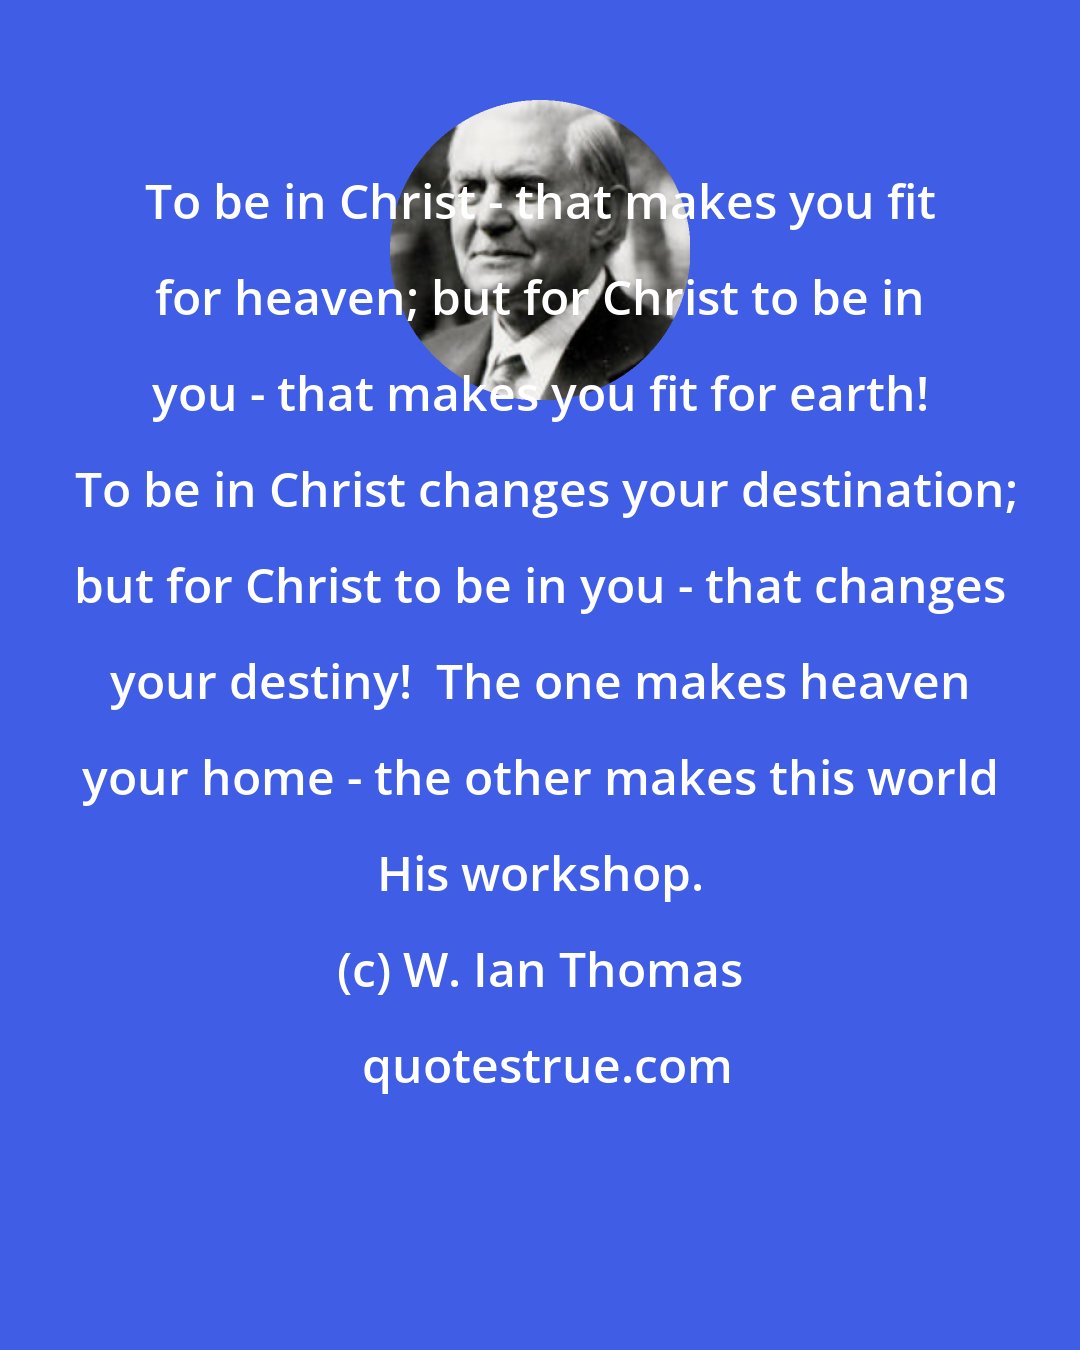 W. Ian Thomas: To be in Christ - that makes you fit for heaven; but for Christ to be in you - that makes you fit for earth!  To be in Christ changes your destination; but for Christ to be in you - that changes your destiny!  The one makes heaven your home - the other makes this world His workshop.